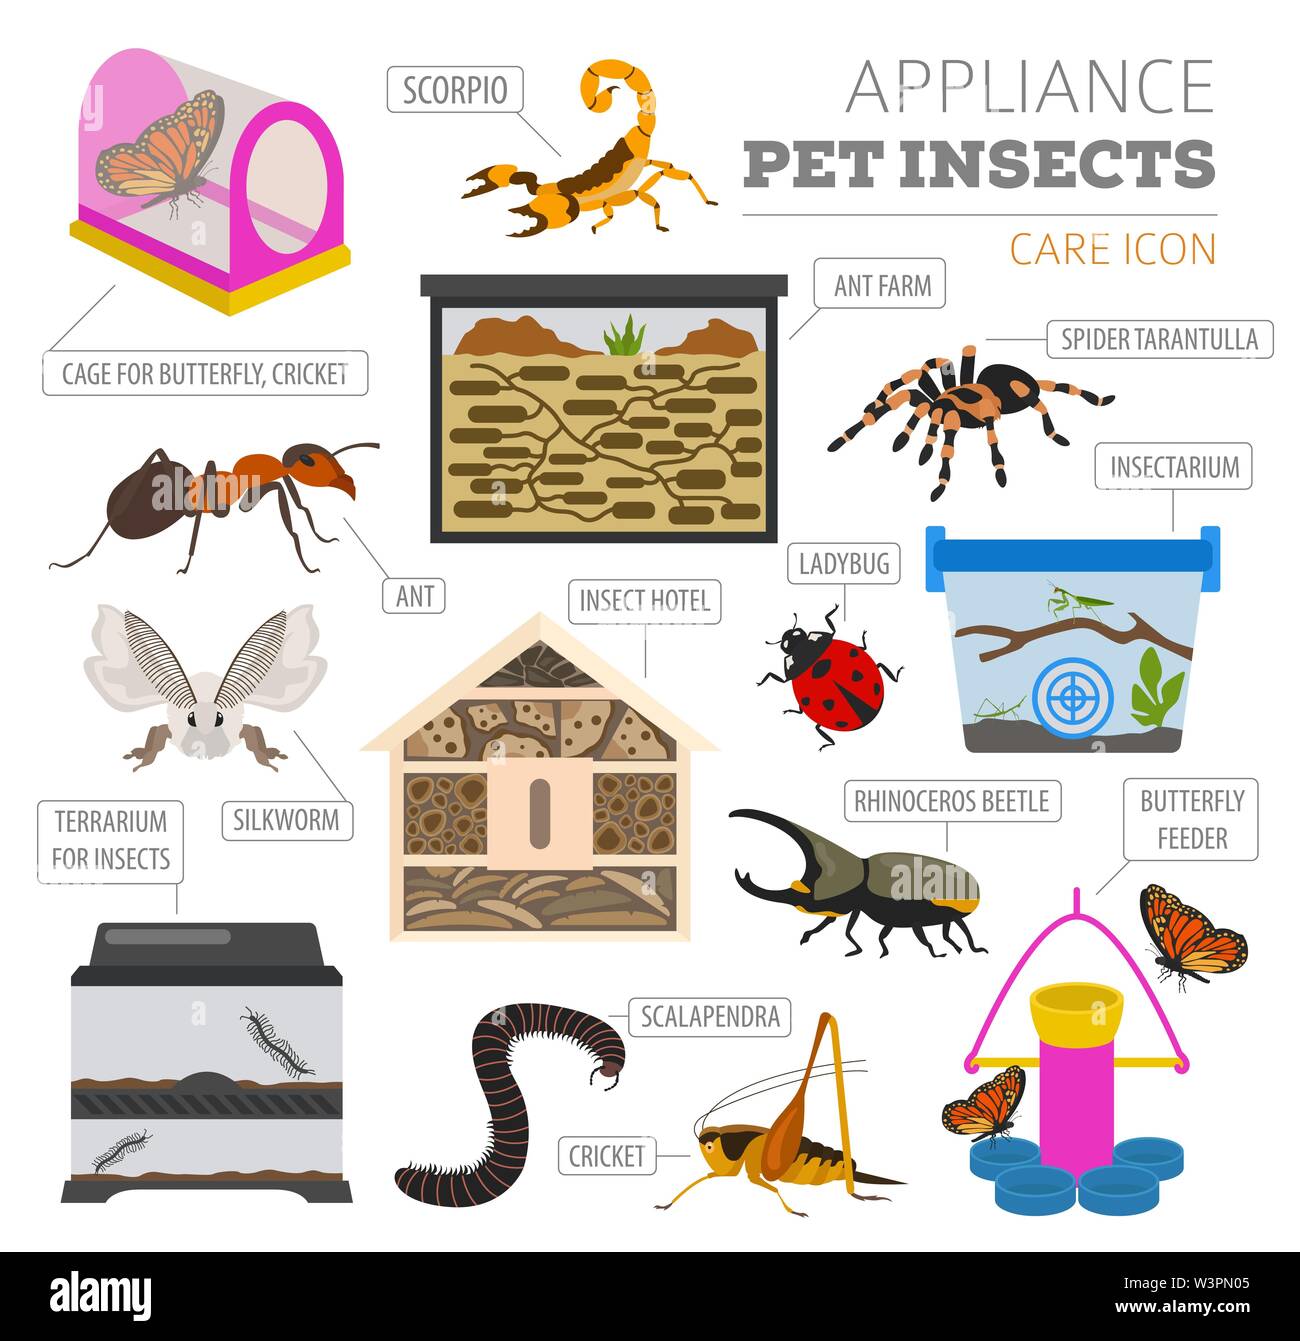 Pet appliance icon set flat style isolated on white. Insects care collection. Create own infographic about beetle, bug, butterfly, stick, mantis, spid Stock Vector